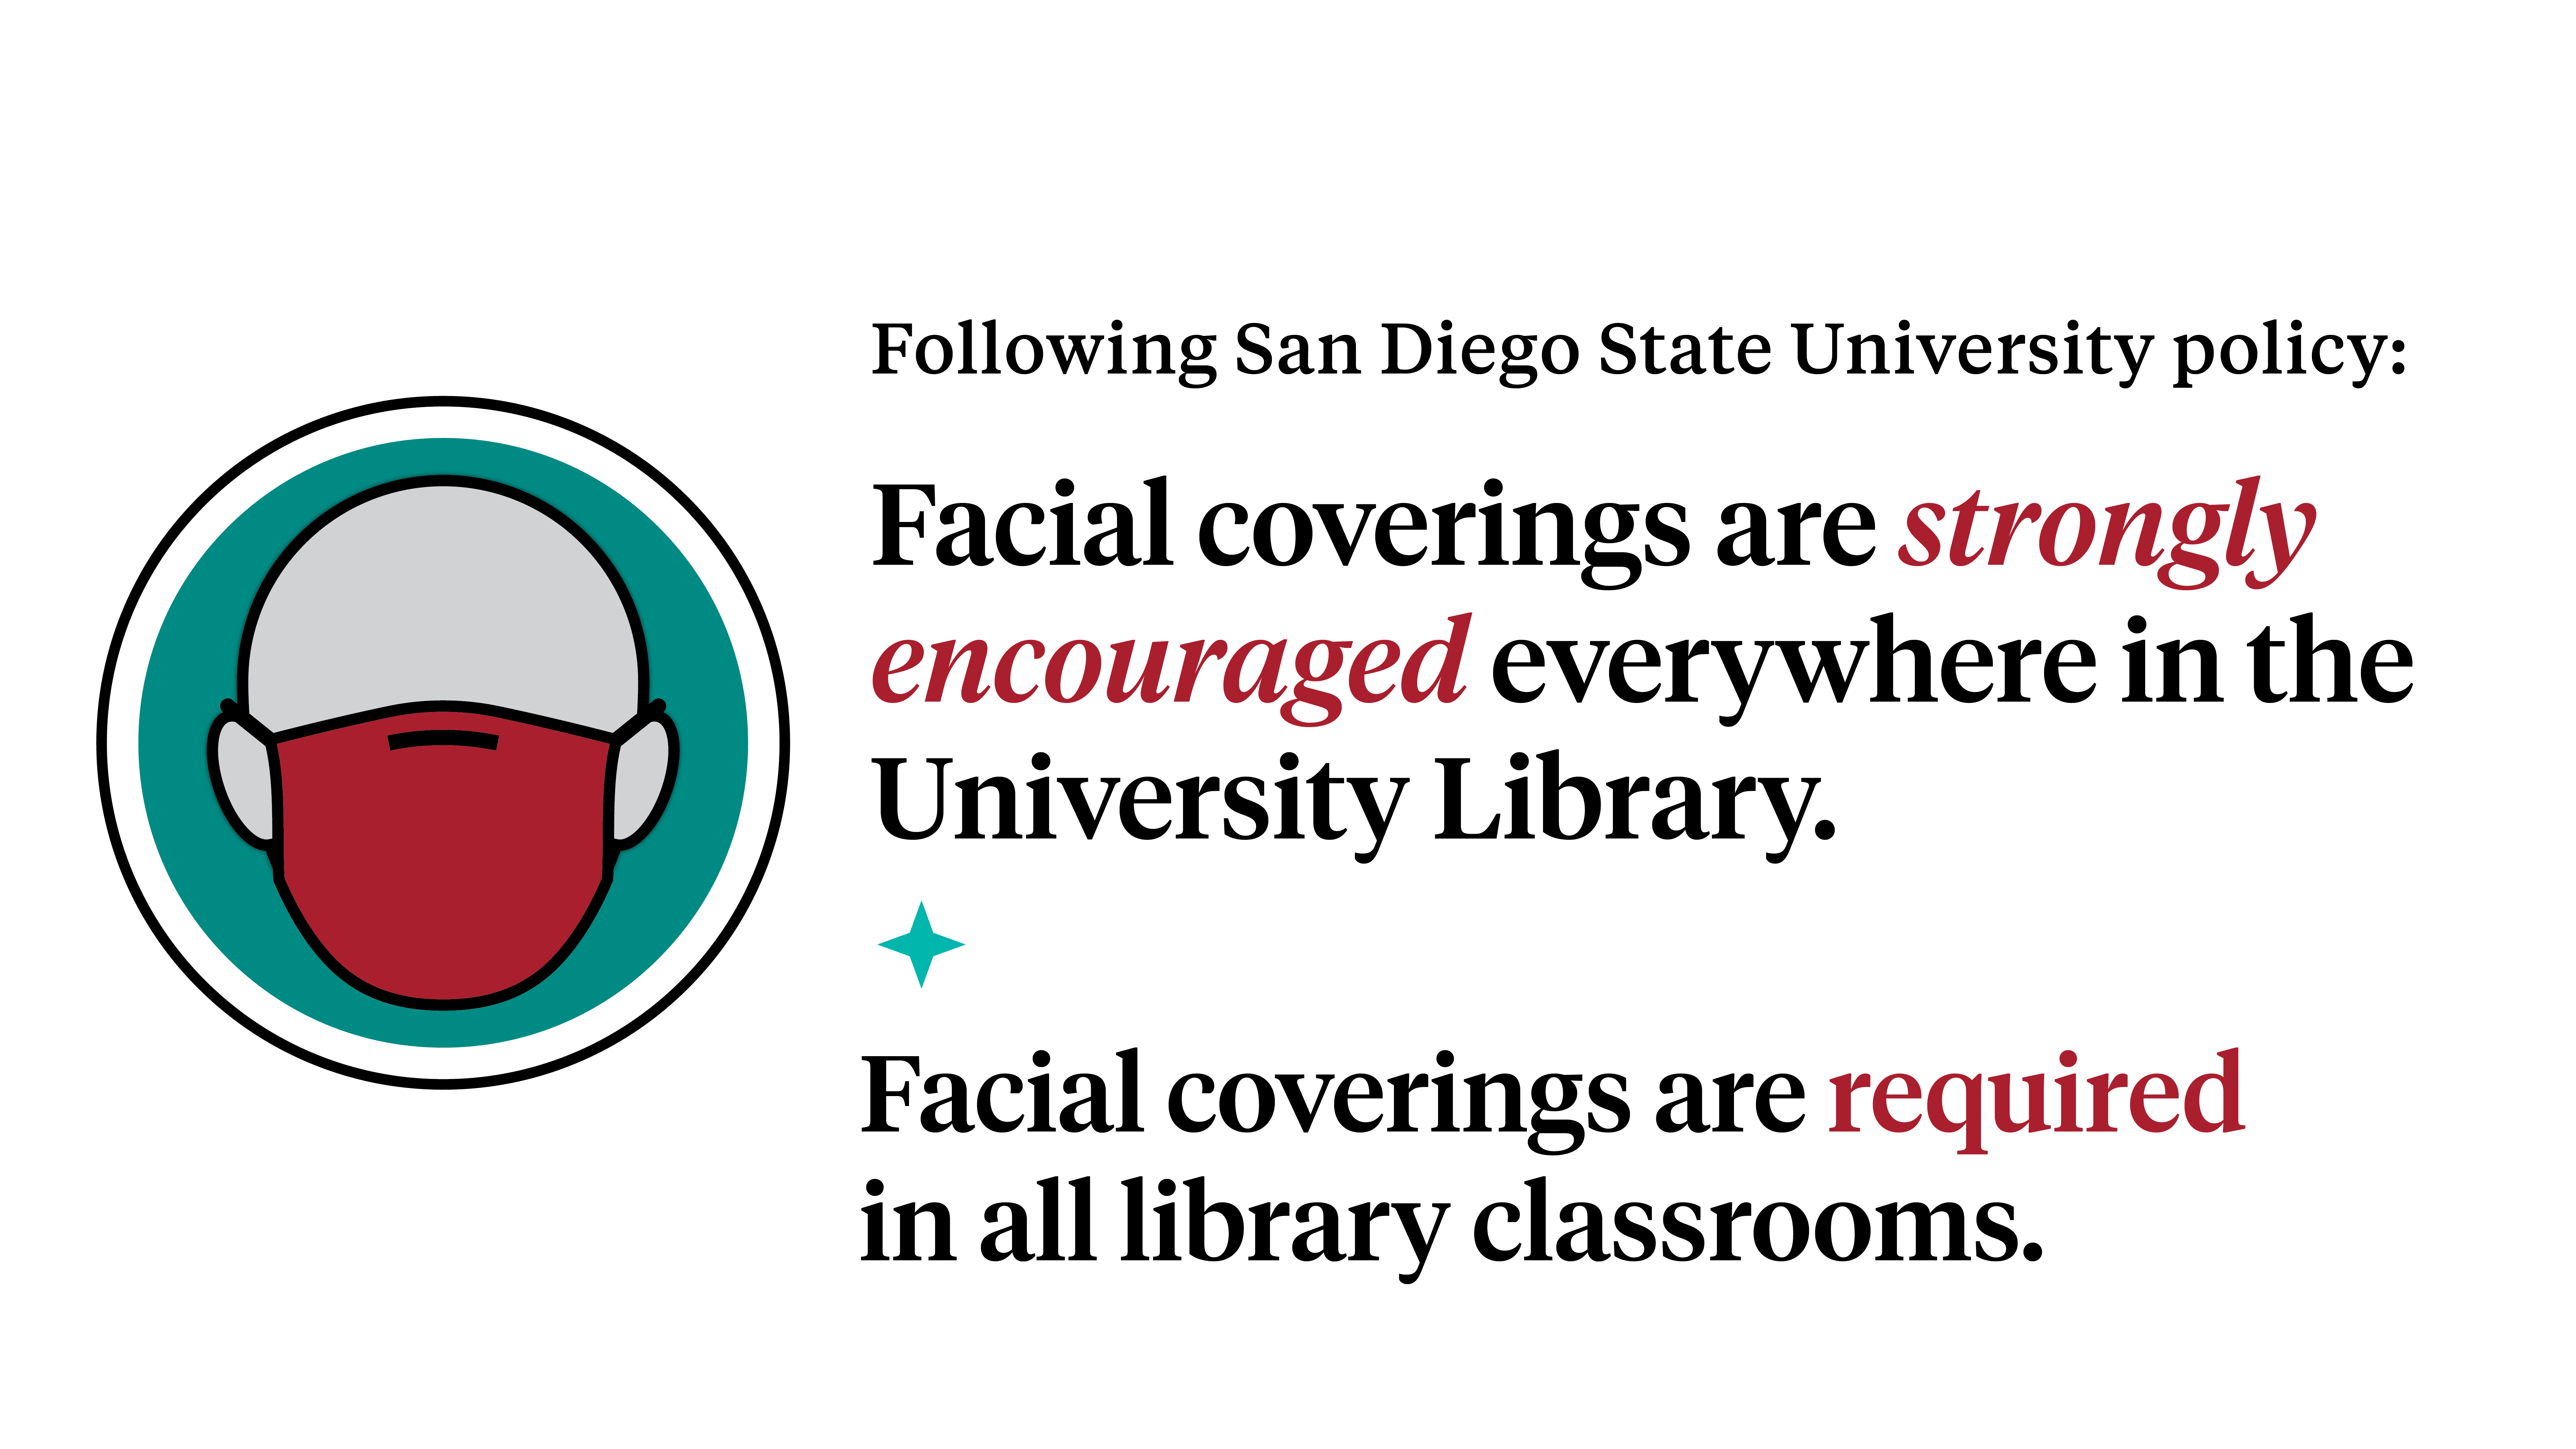 Facial coverings are strongly encouraged